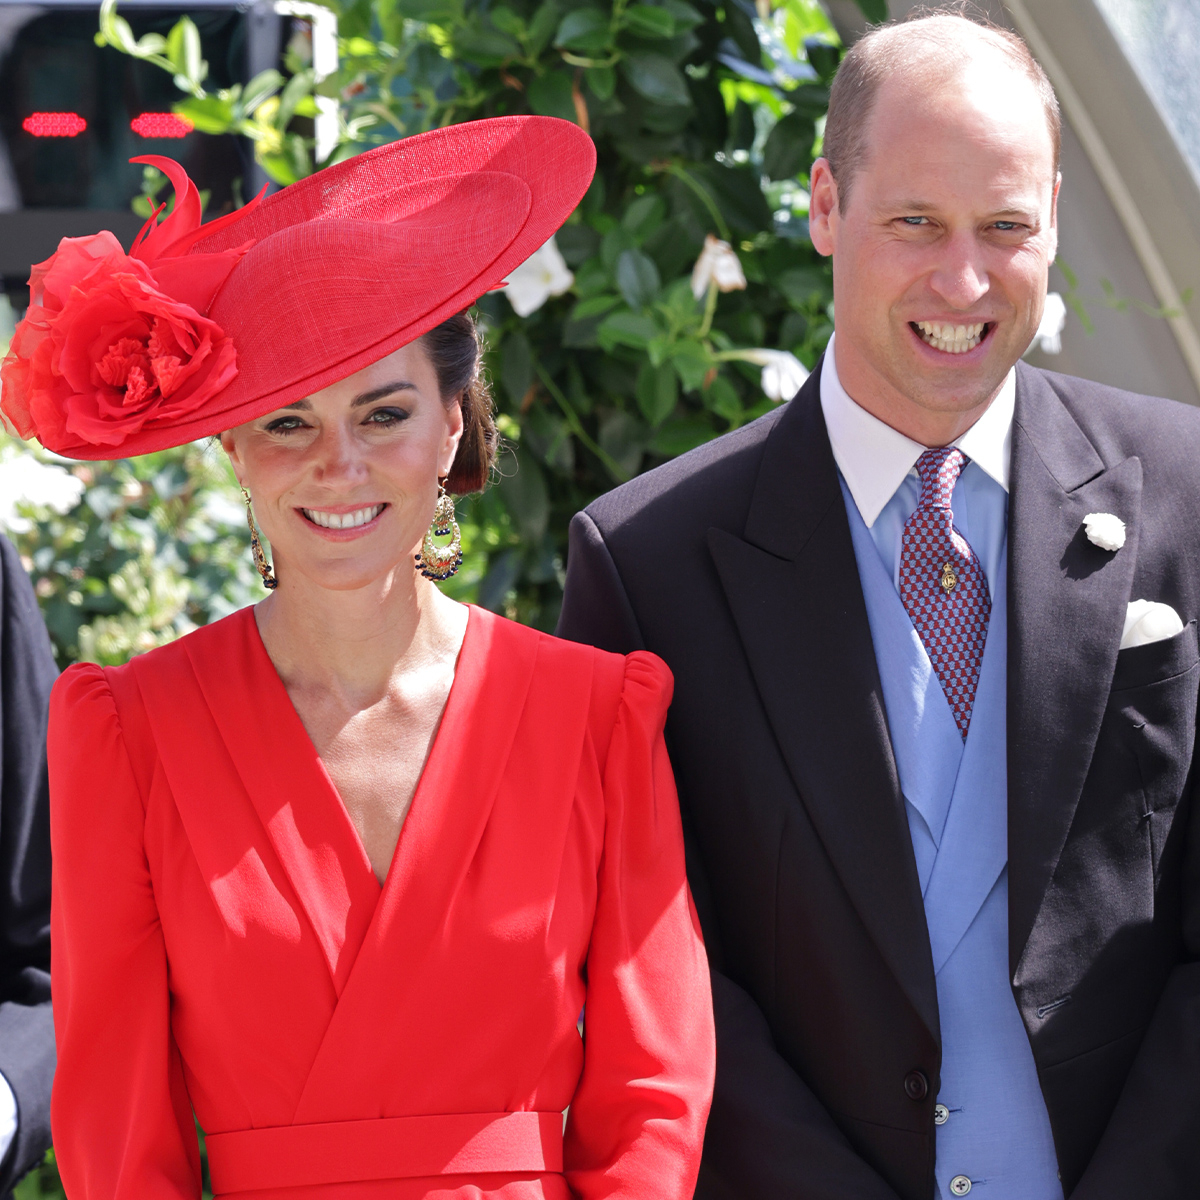 You’ll Be Royally Flushed by Kate Middleton’s Fiery Red Look